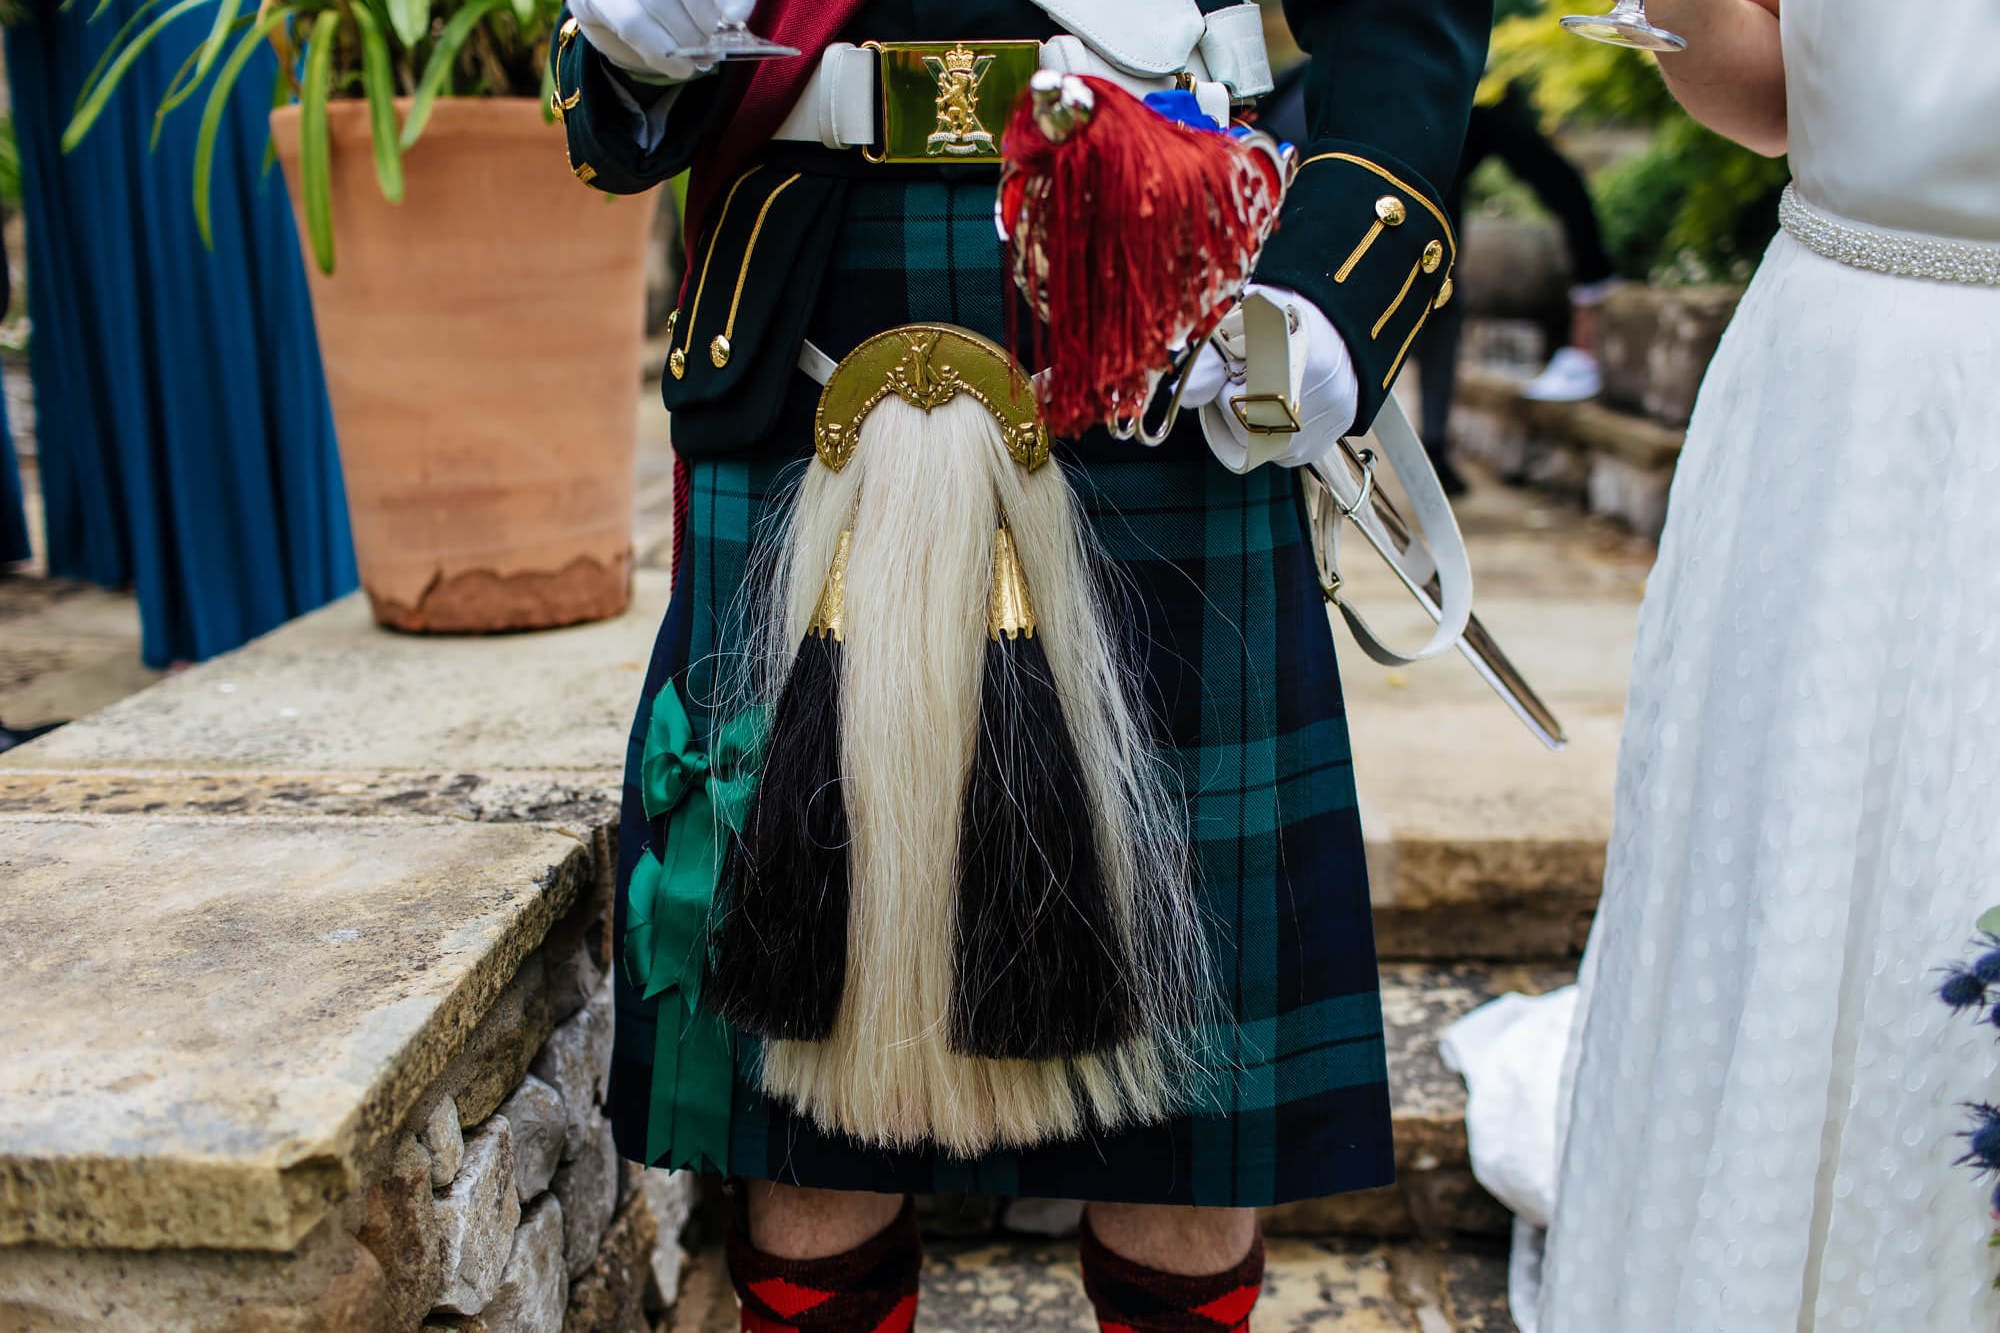 A close up of the groom's military sporran